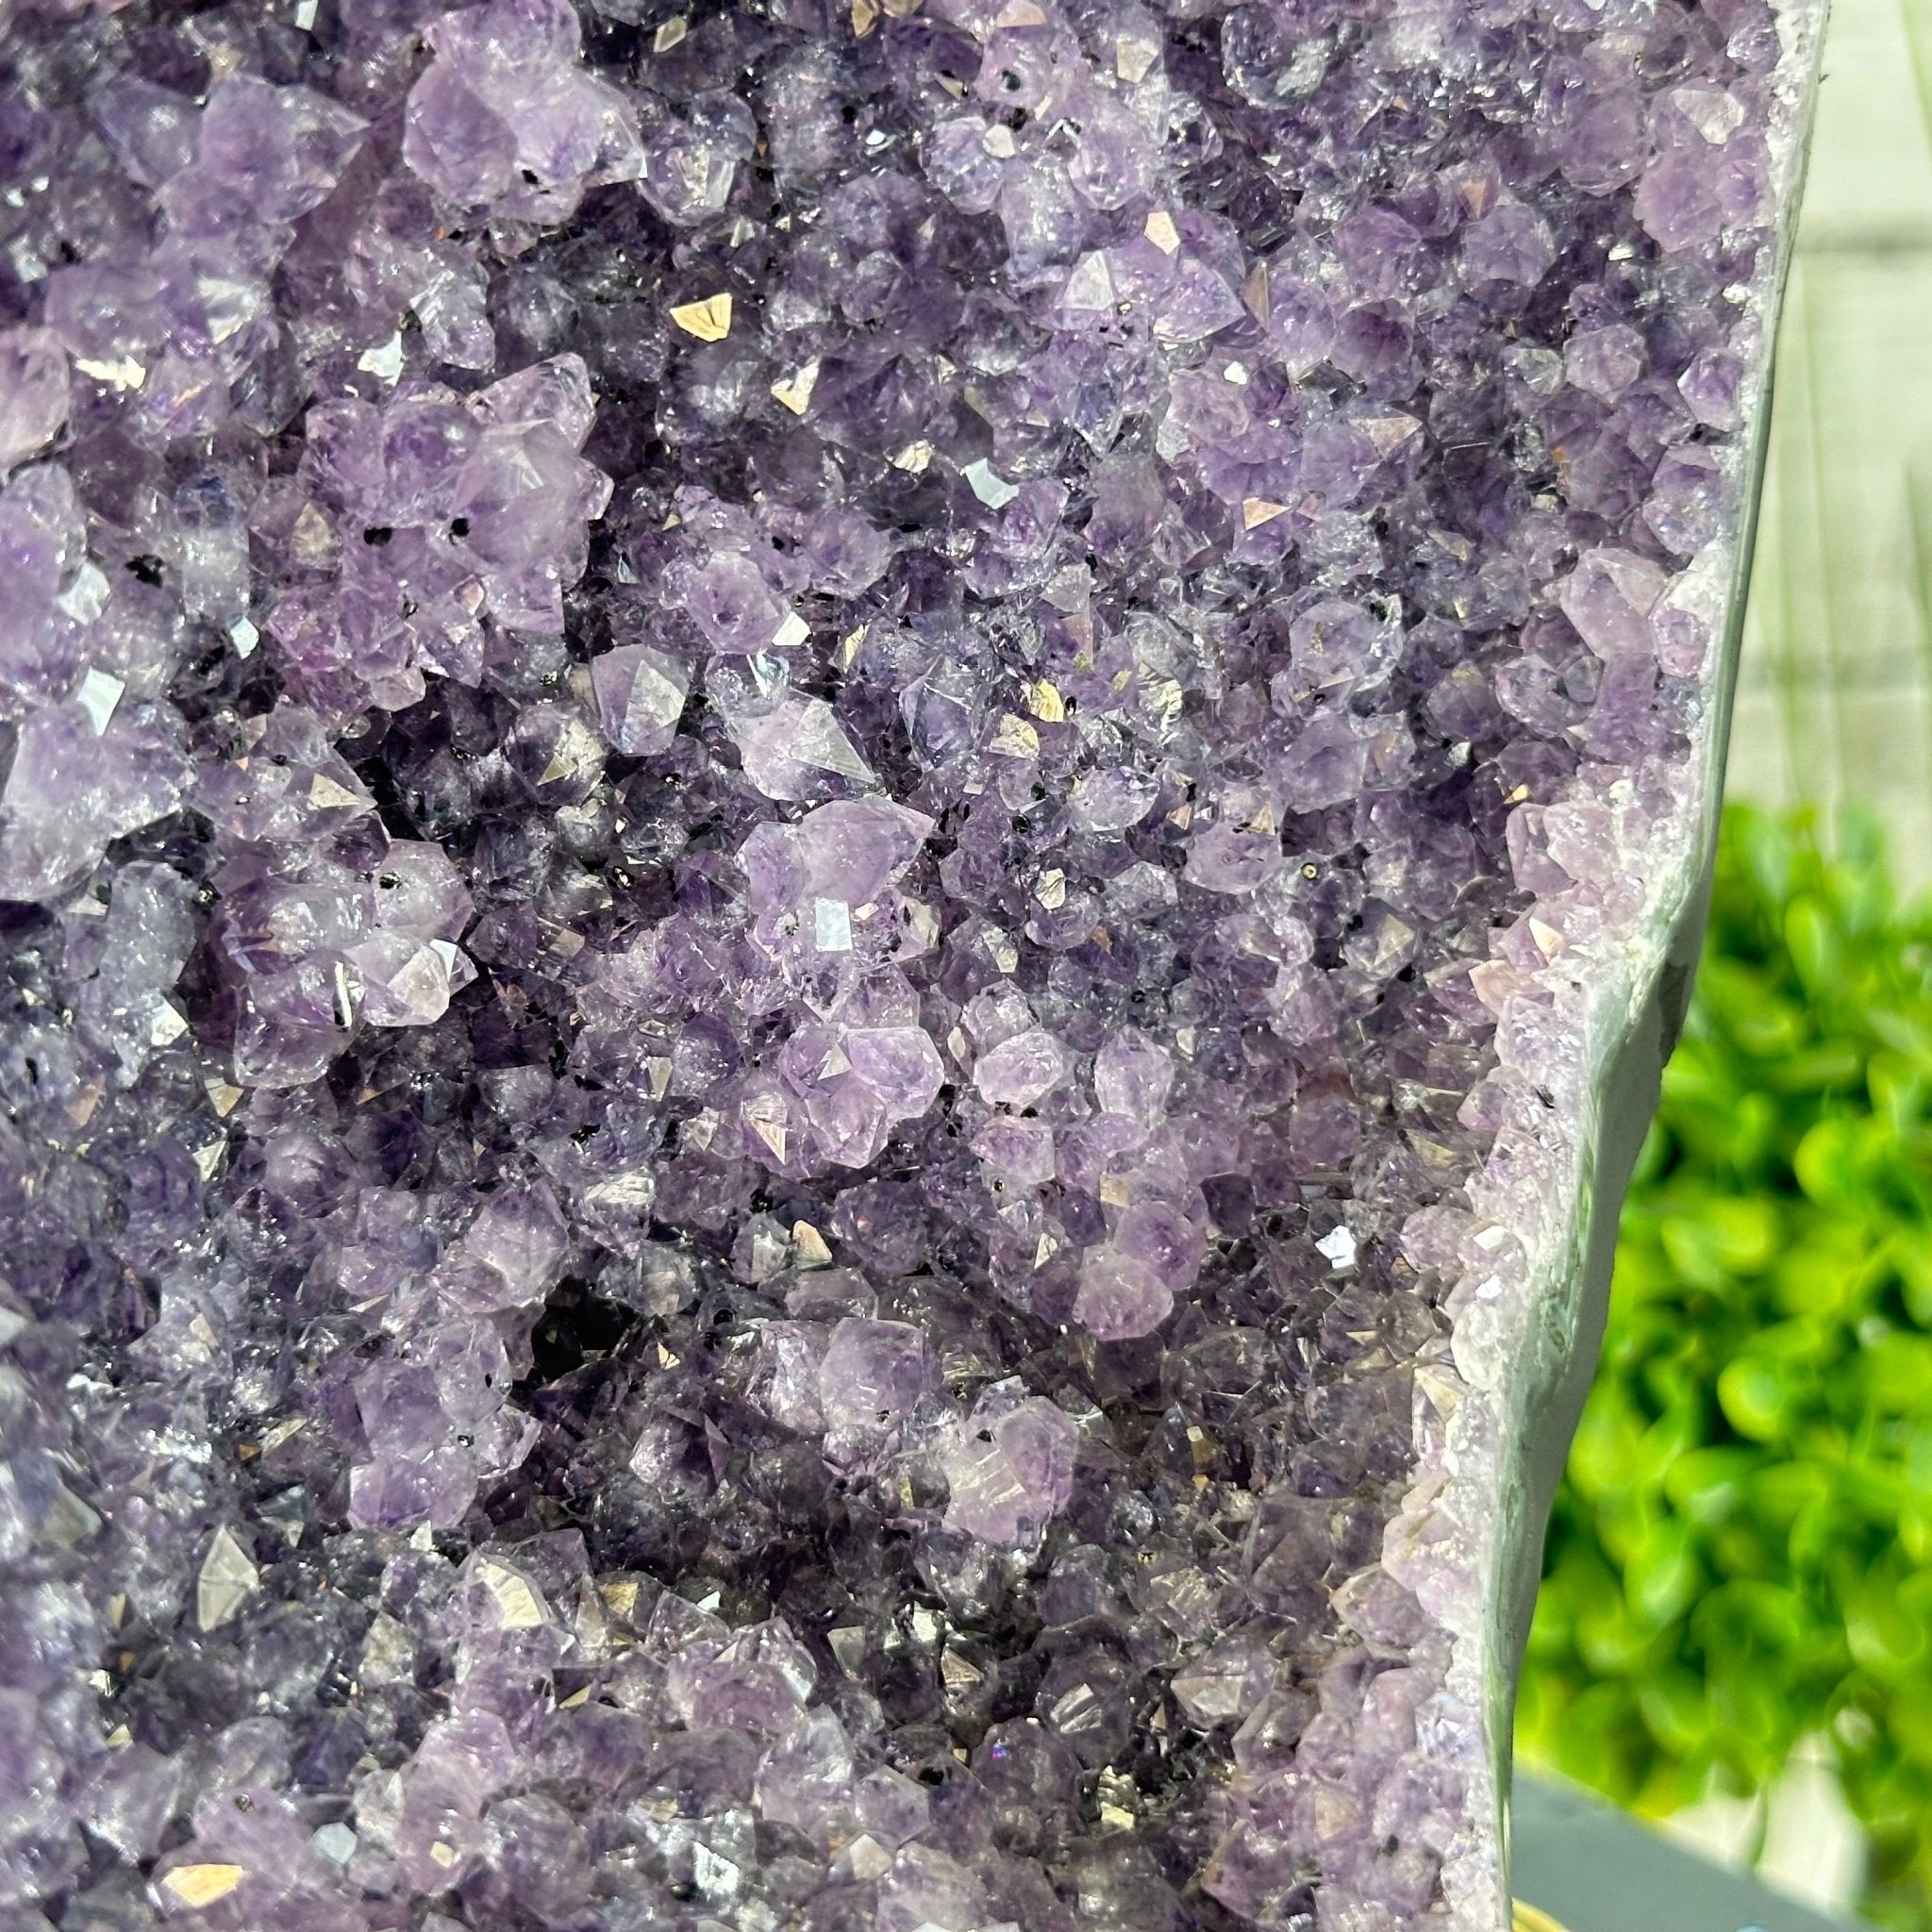 Quality Amethyst Cluster on a Metal Base, 16.9 lbs & 12.5" Tall #5491 - 0058 - Brazil GemsBrazil GemsQuality Amethyst Cluster on a Metal Base, 16.9 lbs & 12.5" Tall #5491 - 0058Clusters on Fixed Bases5491 - 0058